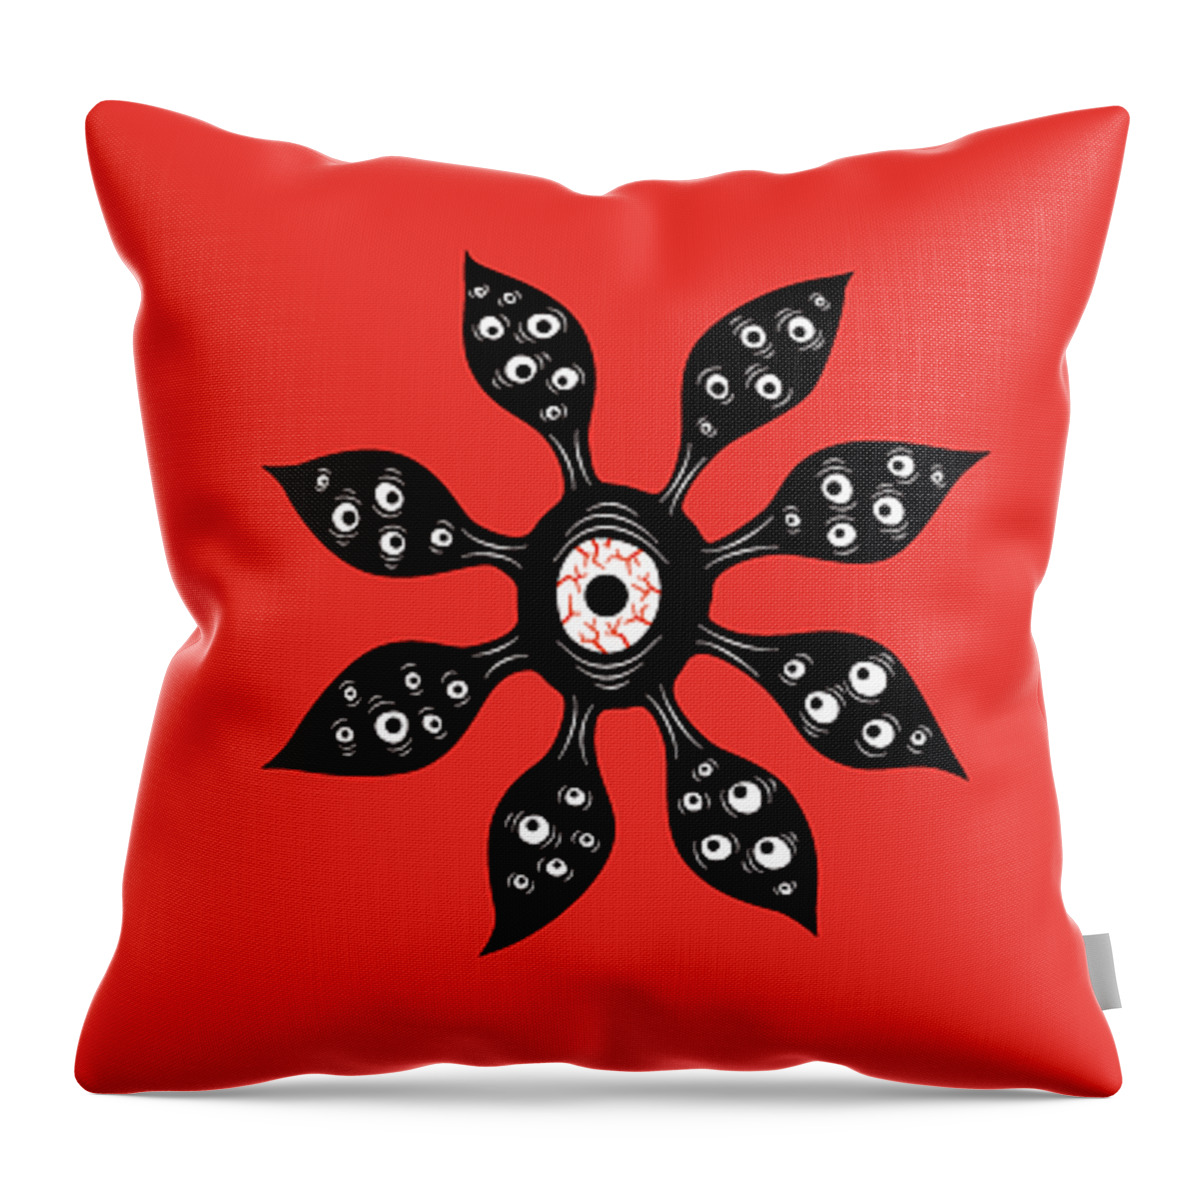 Witch Throw Pillow featuring the digital art Eye Monster Witchy Weird Art by Boriana Giormova